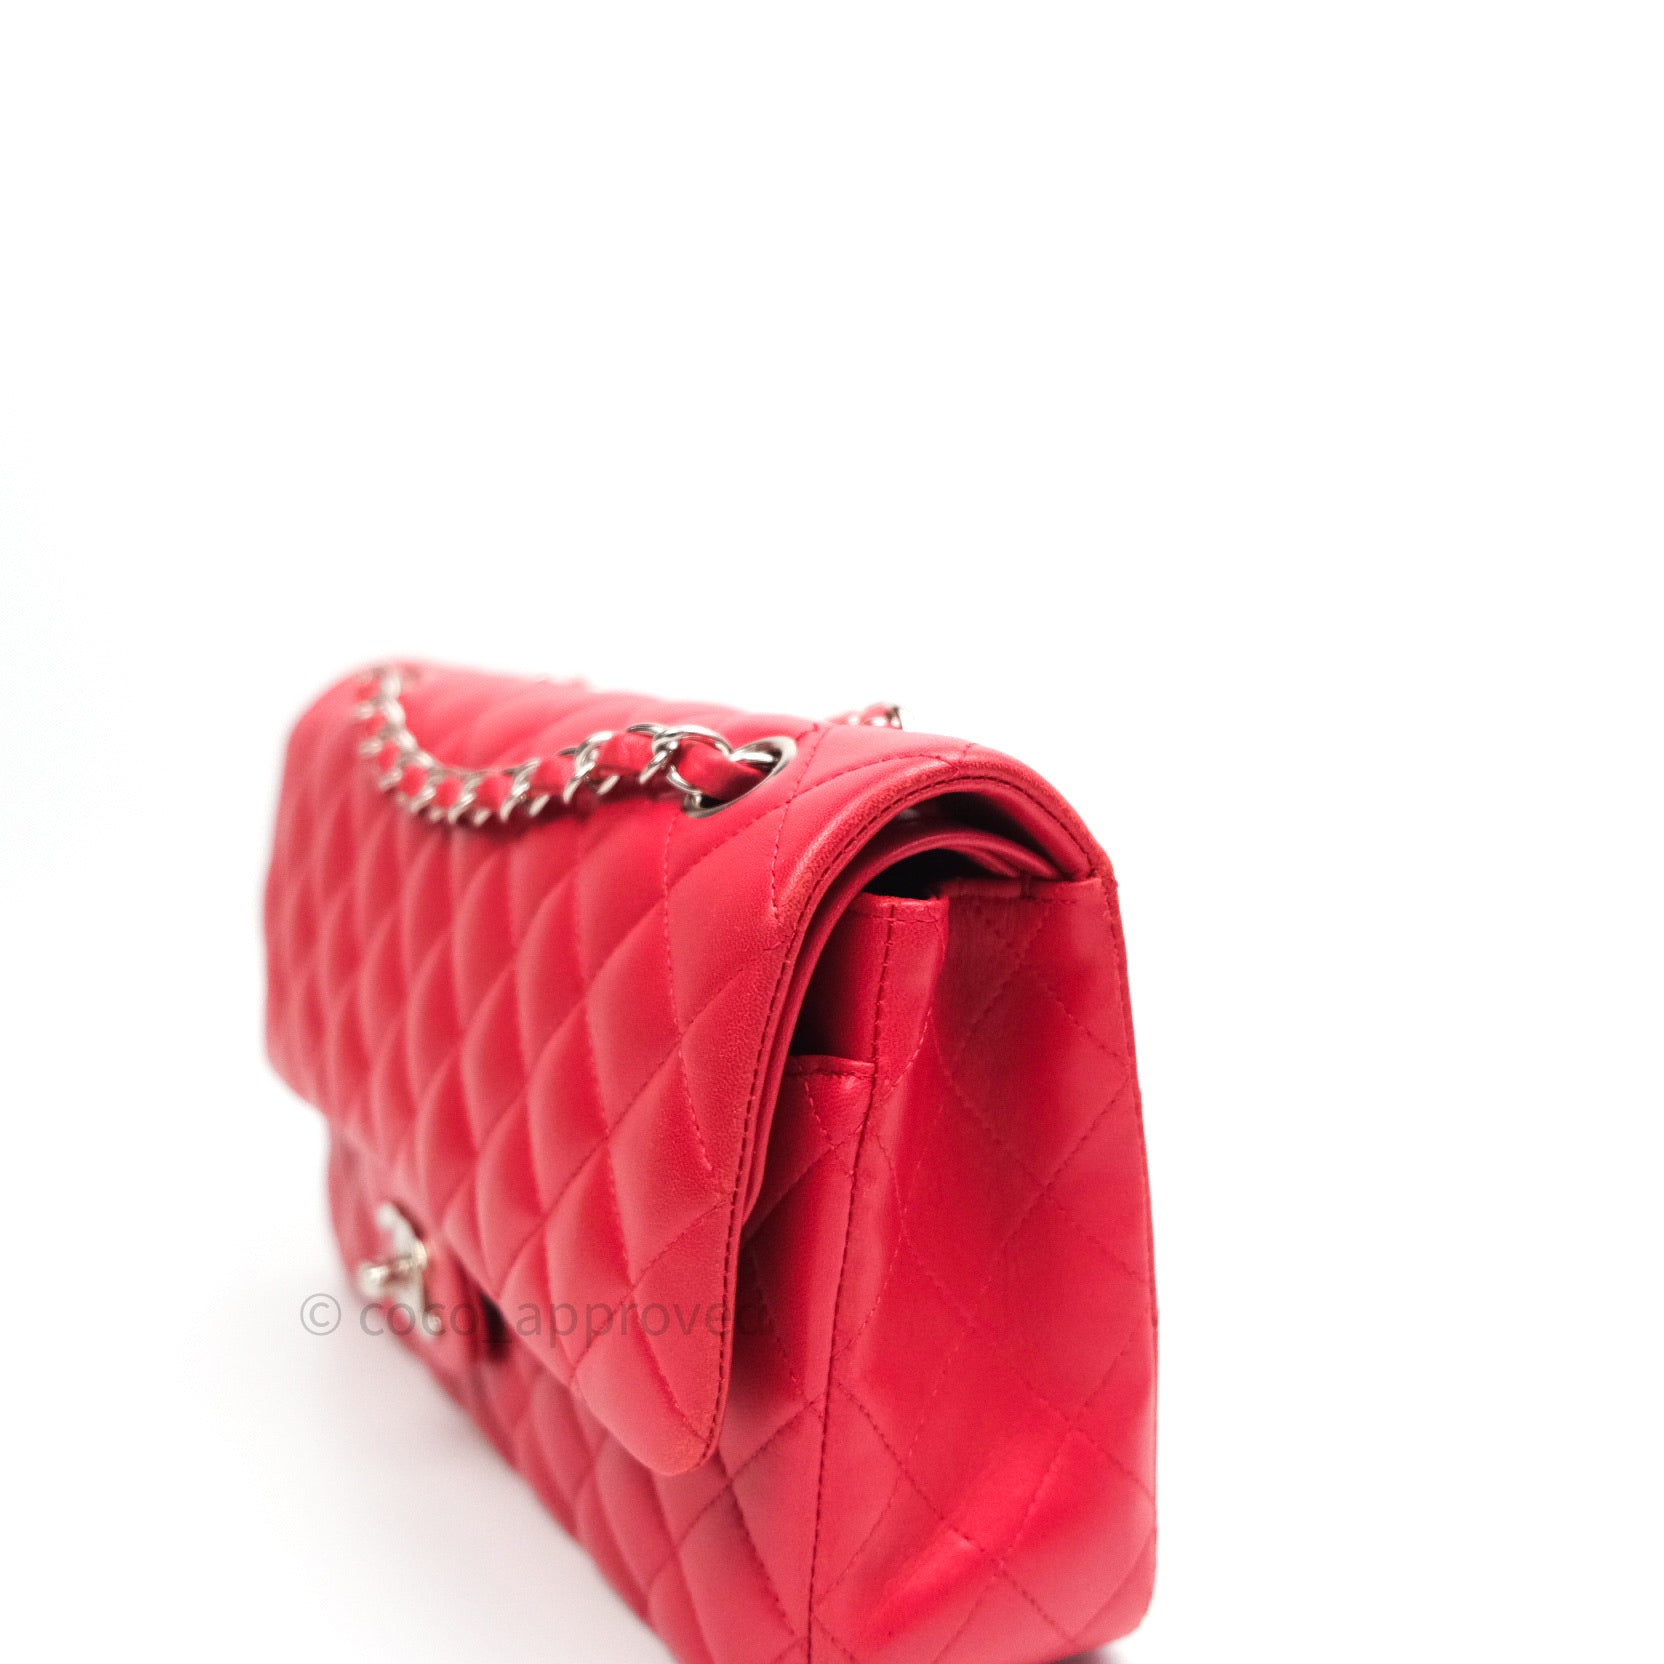 chanel bag with red interior